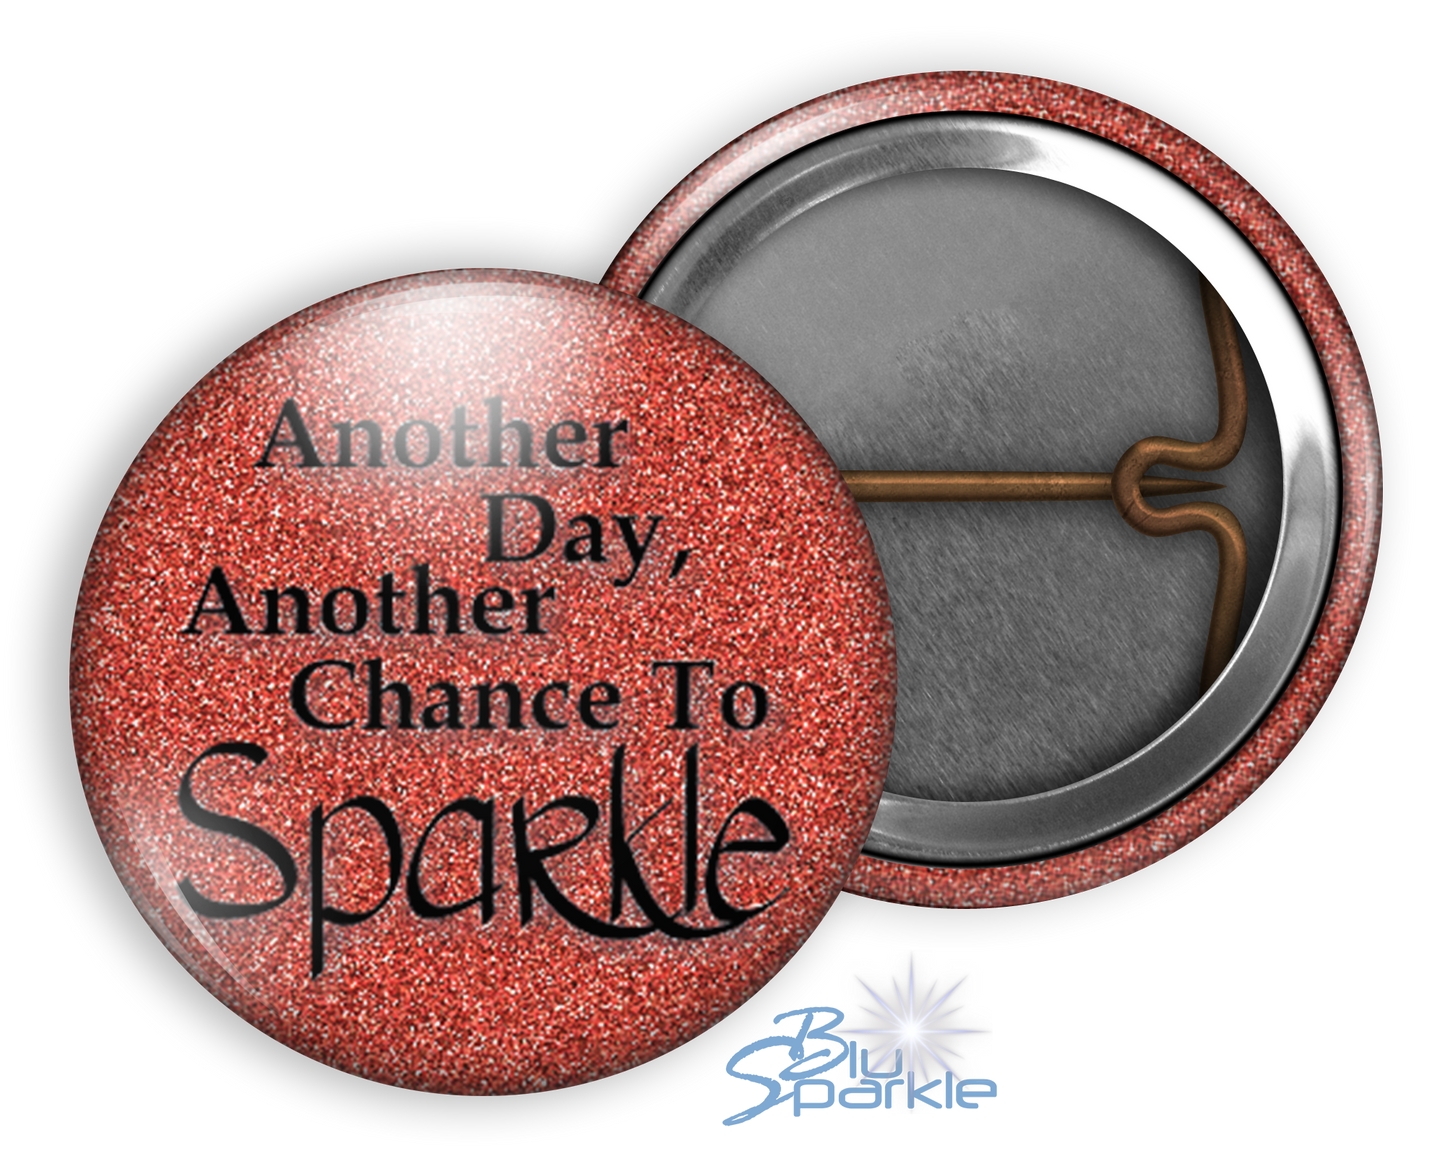 Another Day, Another Chance to Sparkle - Pinback Buttons